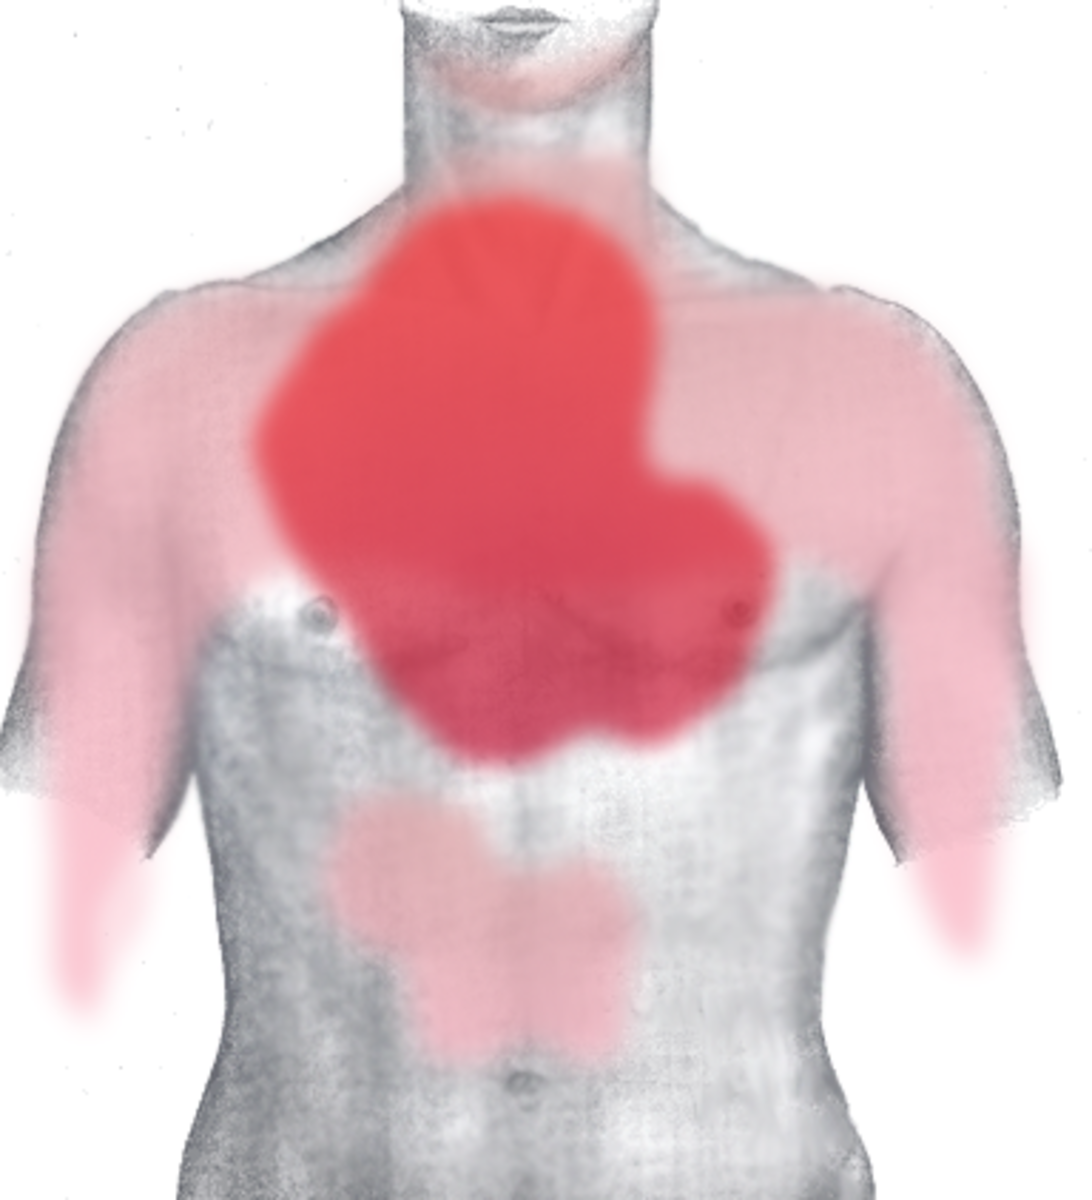 Rough diagram of pain zones in myocardial infarction; dark red: most typical area, light red: other possible areas; view of the chest 